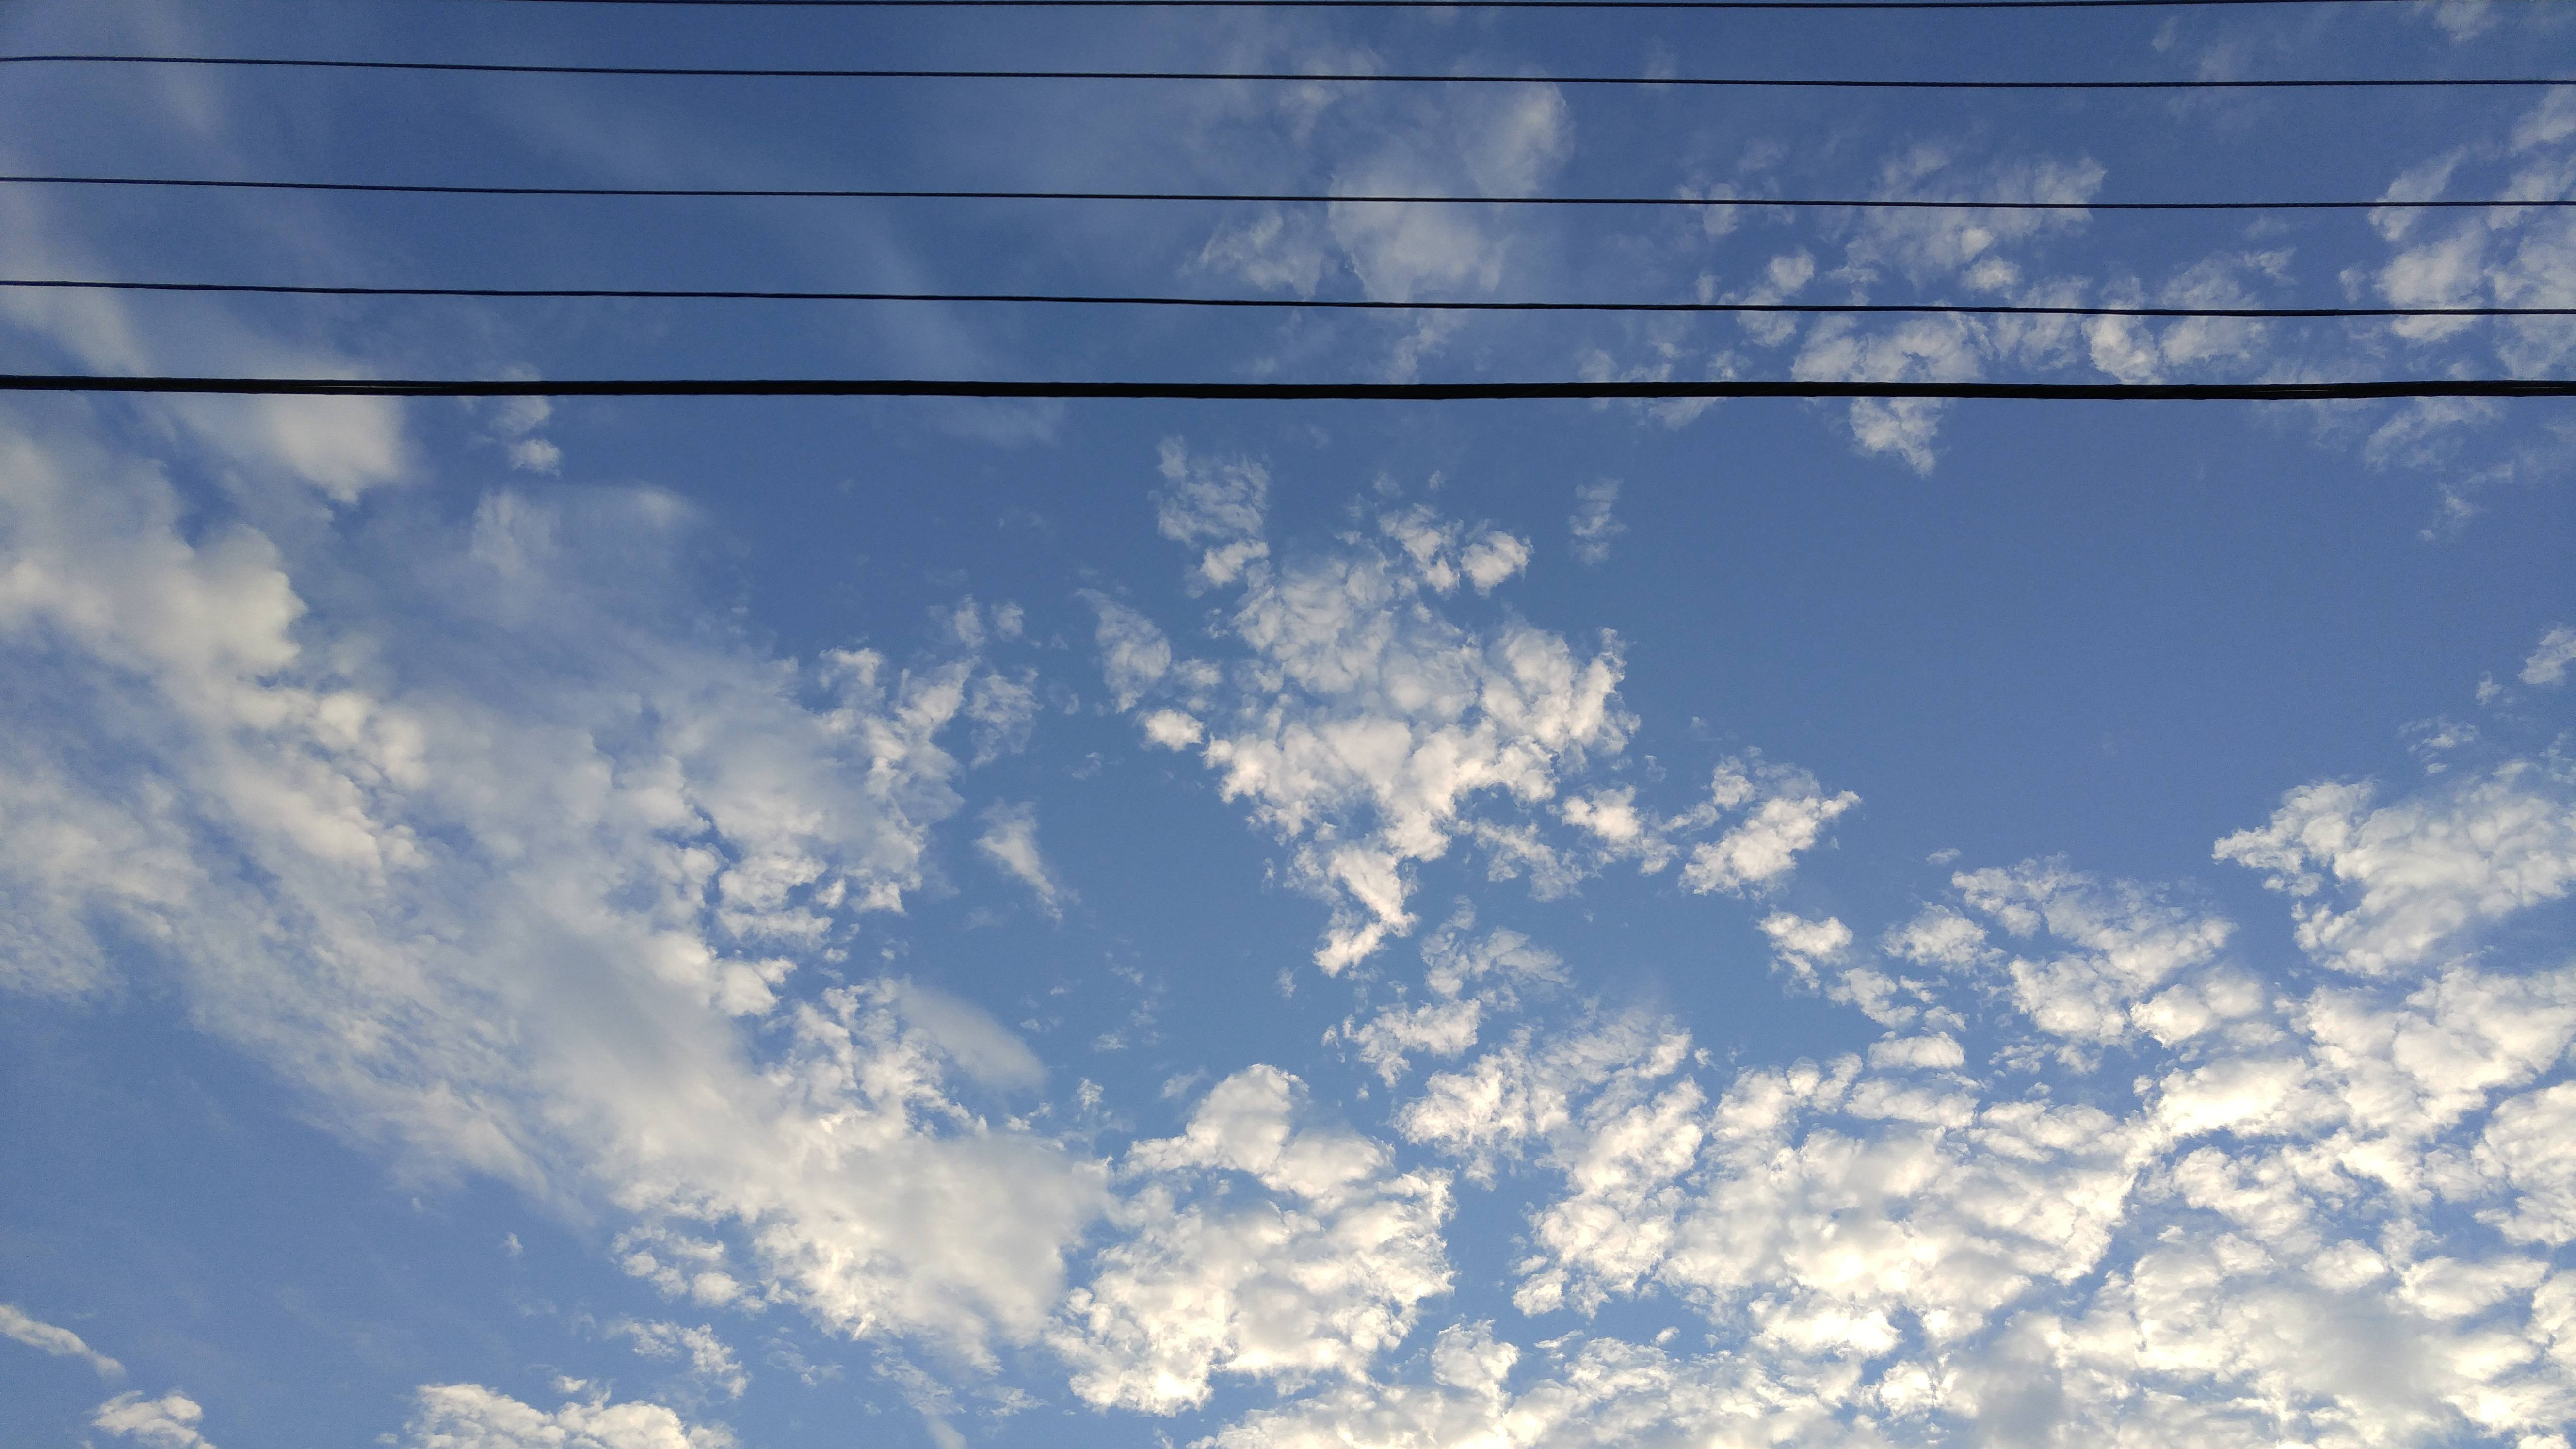 Thaught These Clouds Looked Cool Taken On Lg G4 Wallpaper - Overhead Power Line - HD Wallpaper 